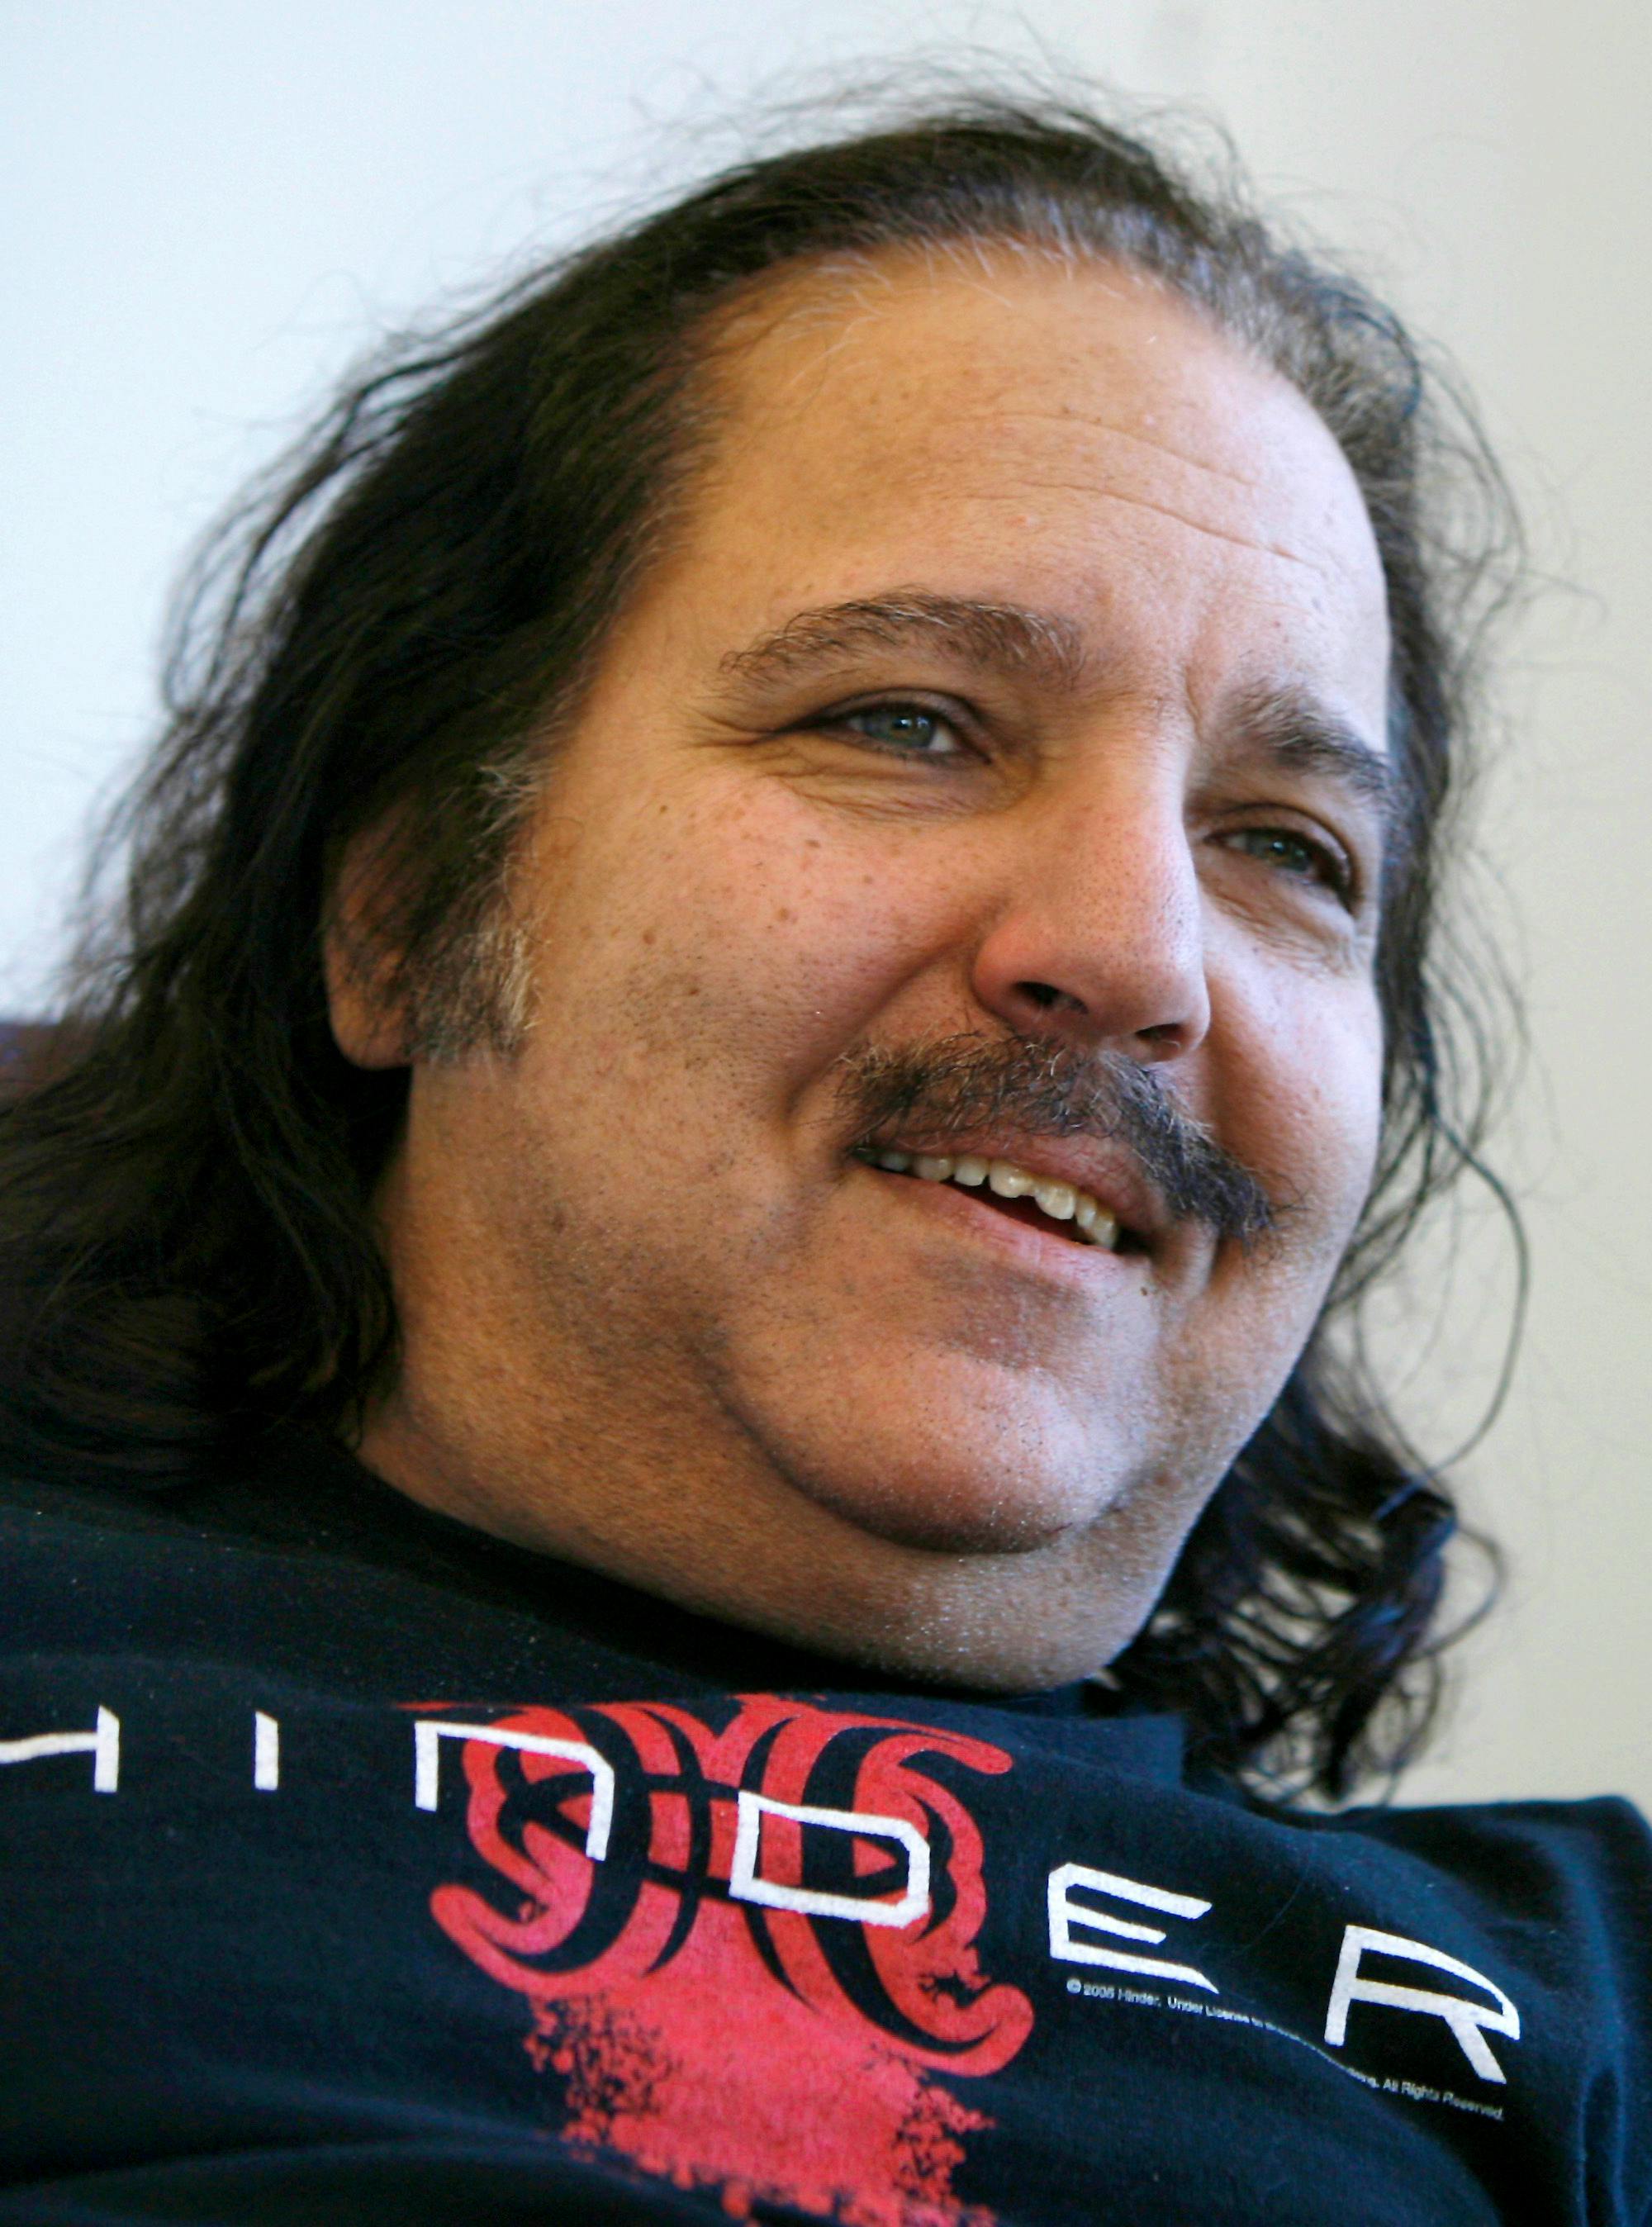 Sexual Assault Porn - Porn star Ron Jeremy charged with rape and sexual assault | SaltWire